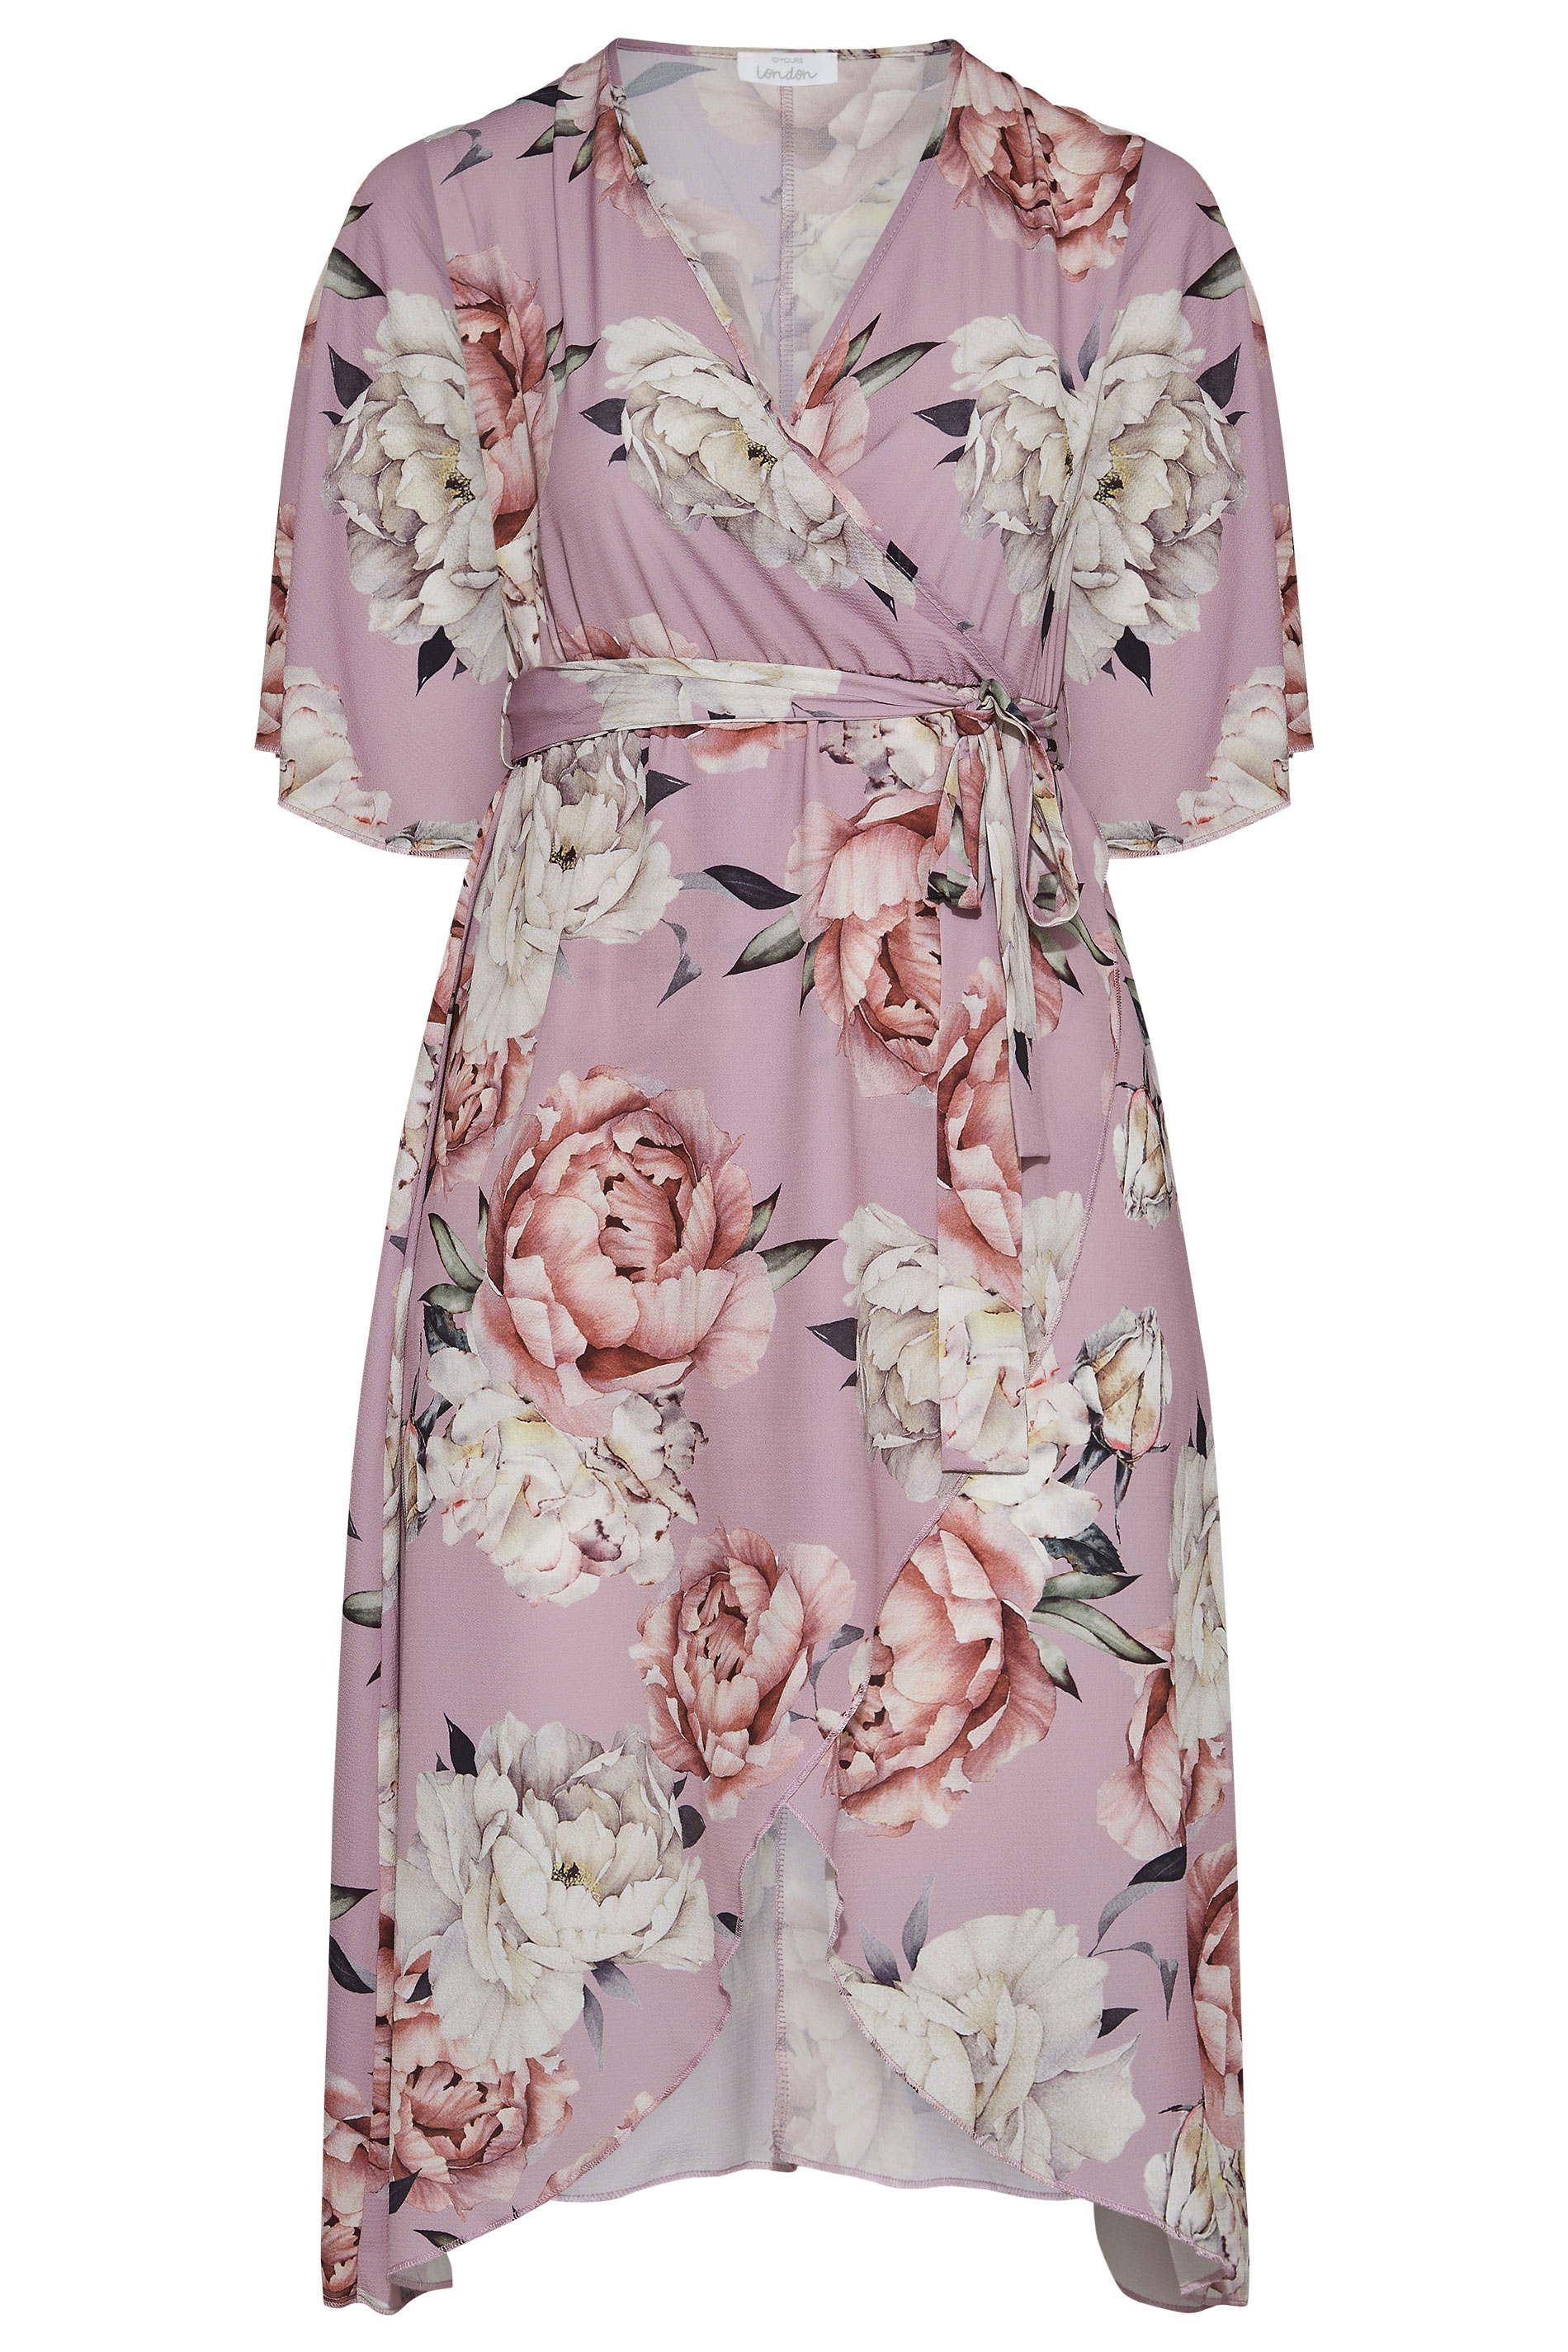 Robes Grande Taille Grande taille  Robes Portefeuilles | YOURS LONDON - Robe Rose Cache-Coeur Imprimé Floral - WC61159